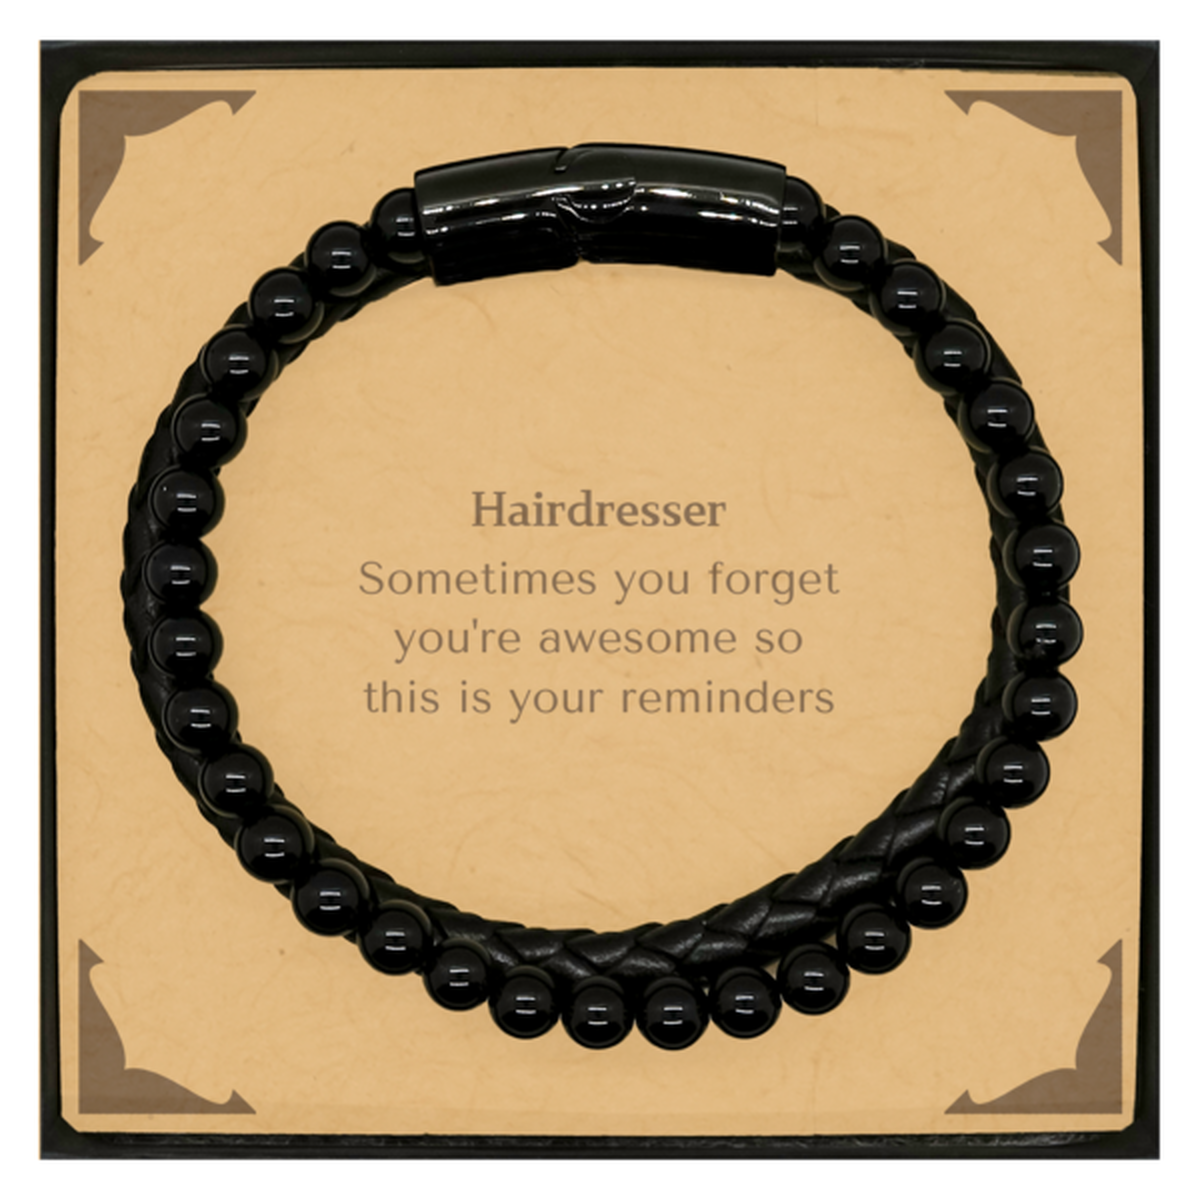 Sentimental Hairdresser Stone Leather Bracelets, Hairdresser Sometimes you forget you're awesome so this is your reminders, Graduation Christmas Birthday Gifts for Hairdresser, Men, Women, Coworkers